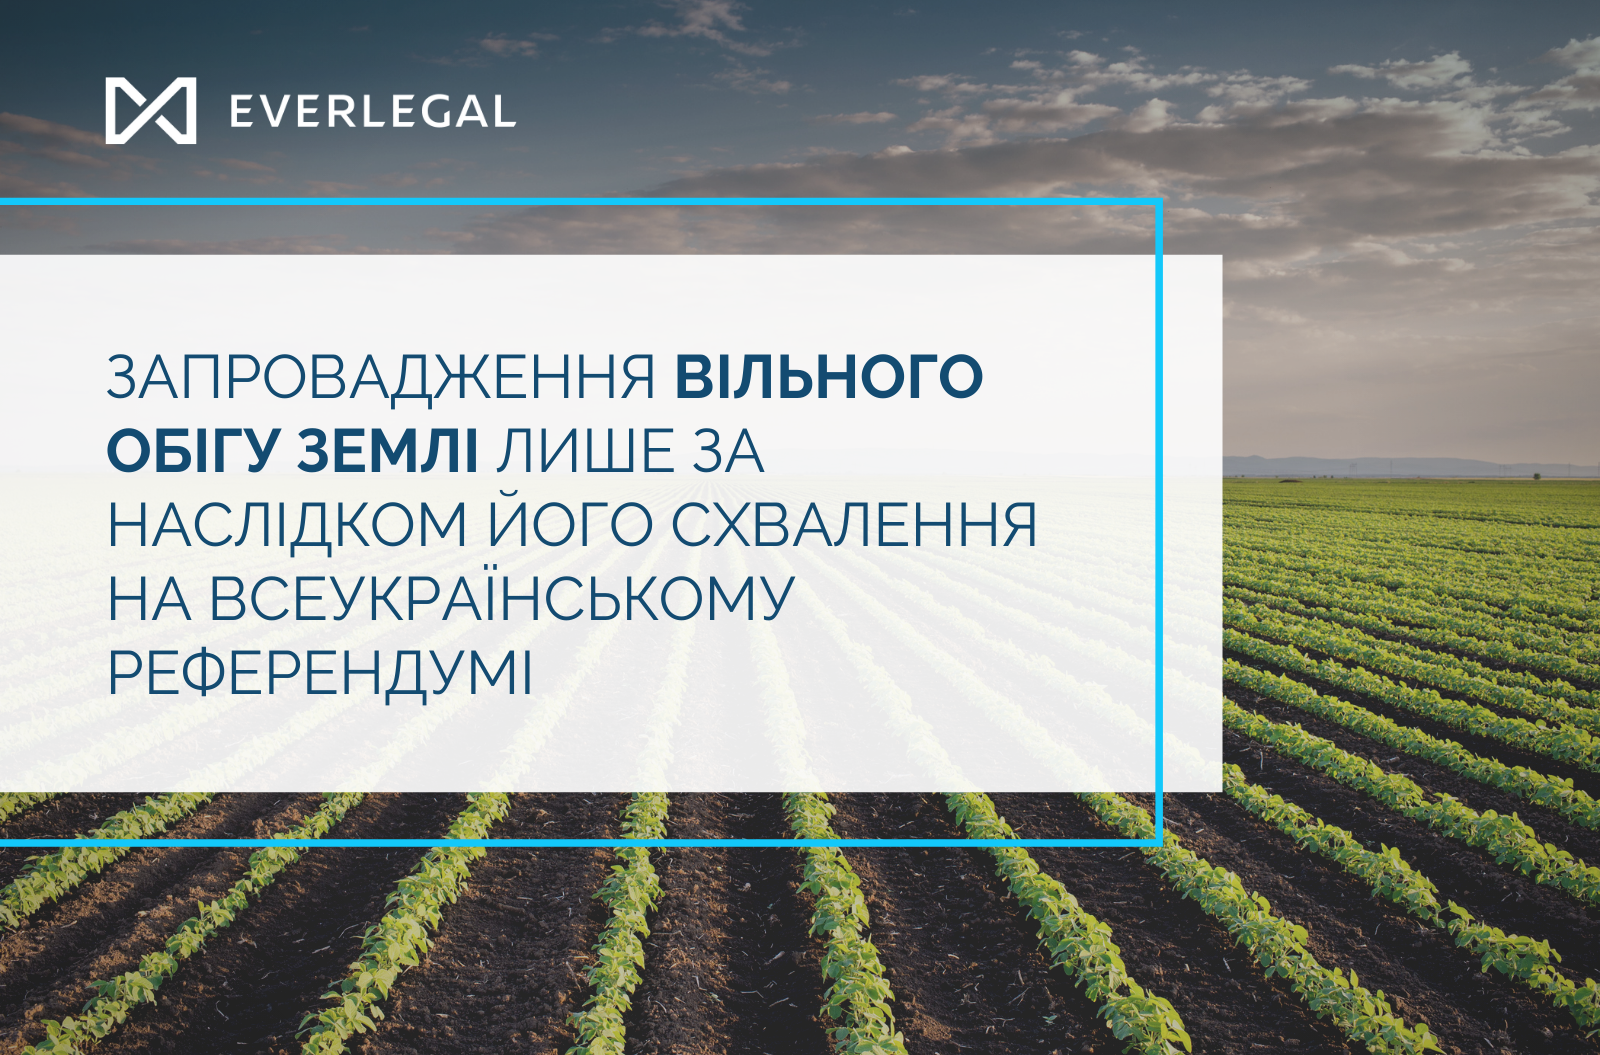 Introduction of a free circulation of land only as a result of its approval in the All-Ukrainian referendum